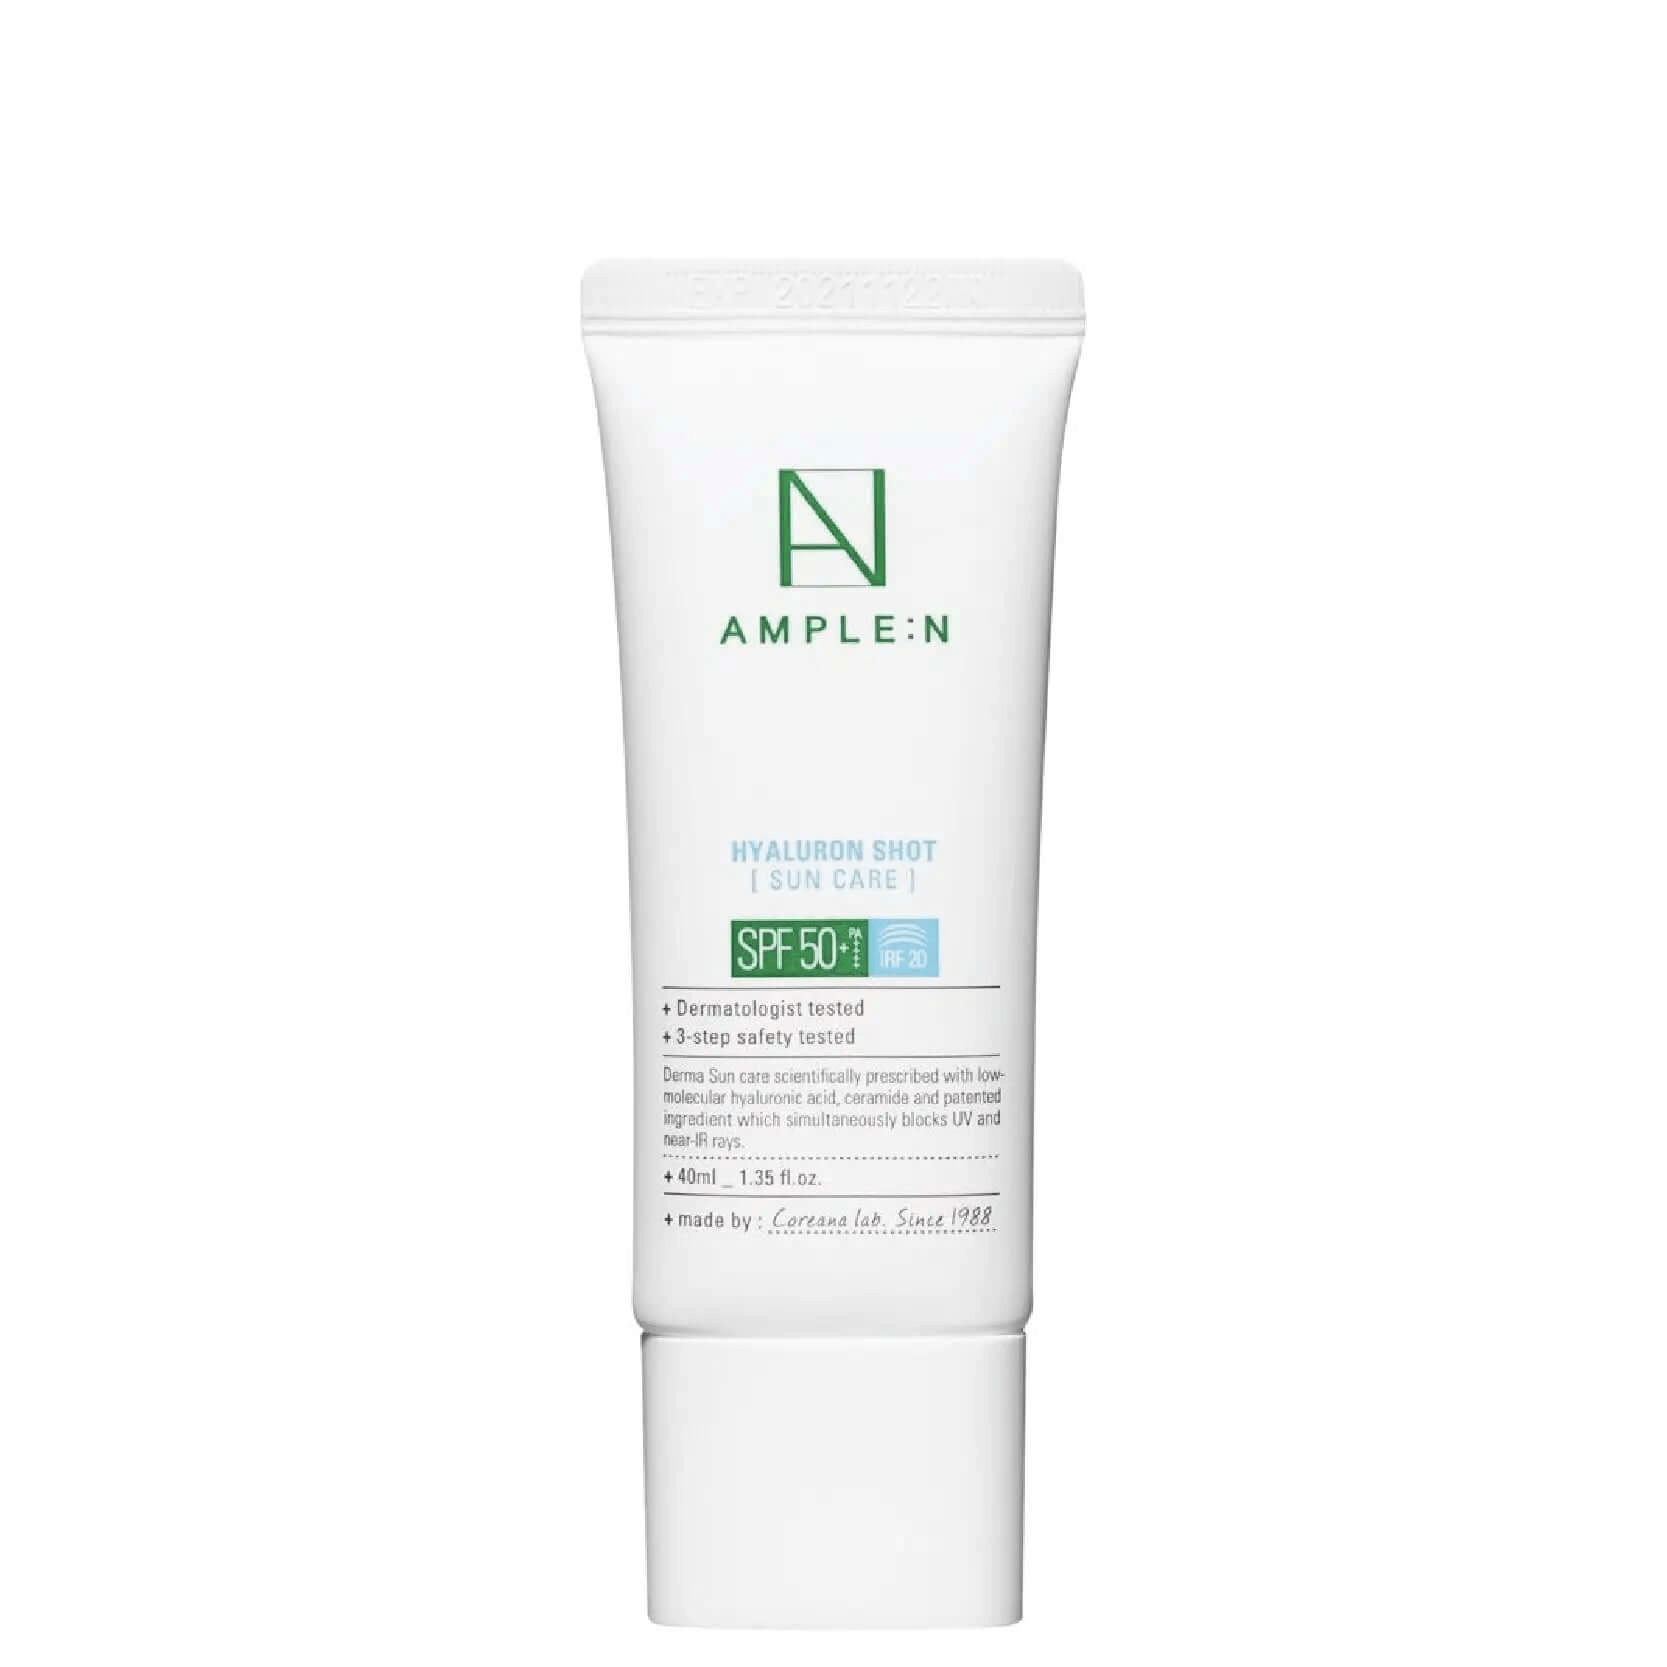 Ample:n Hyaluron Shot Ampoule Sun Care SPF 50+ PA++++ Ample:n